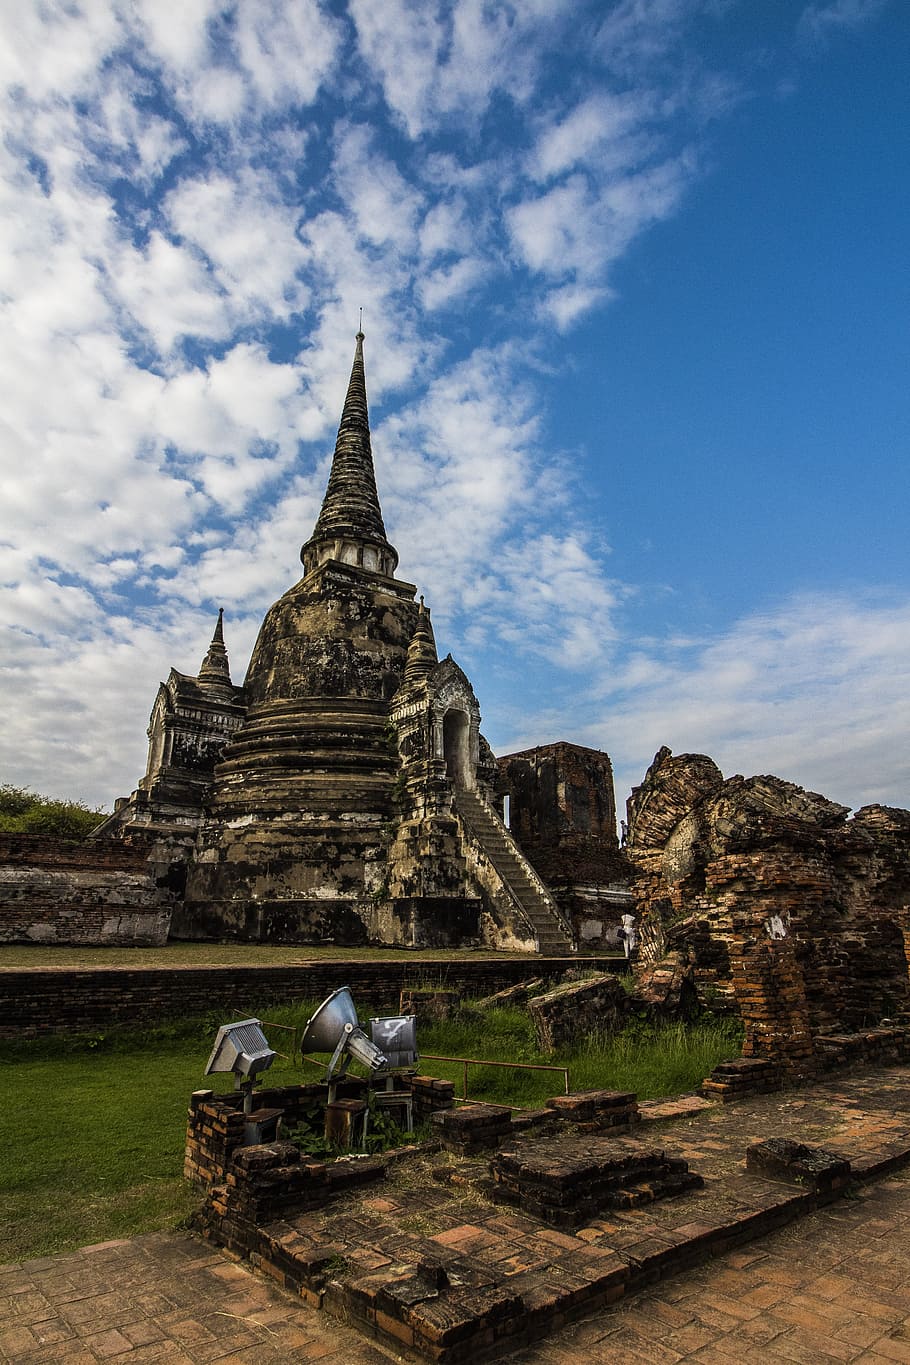 ruins, ayutthaya, blue sky, thailand, old, religion, history, architecture, the past, built structure